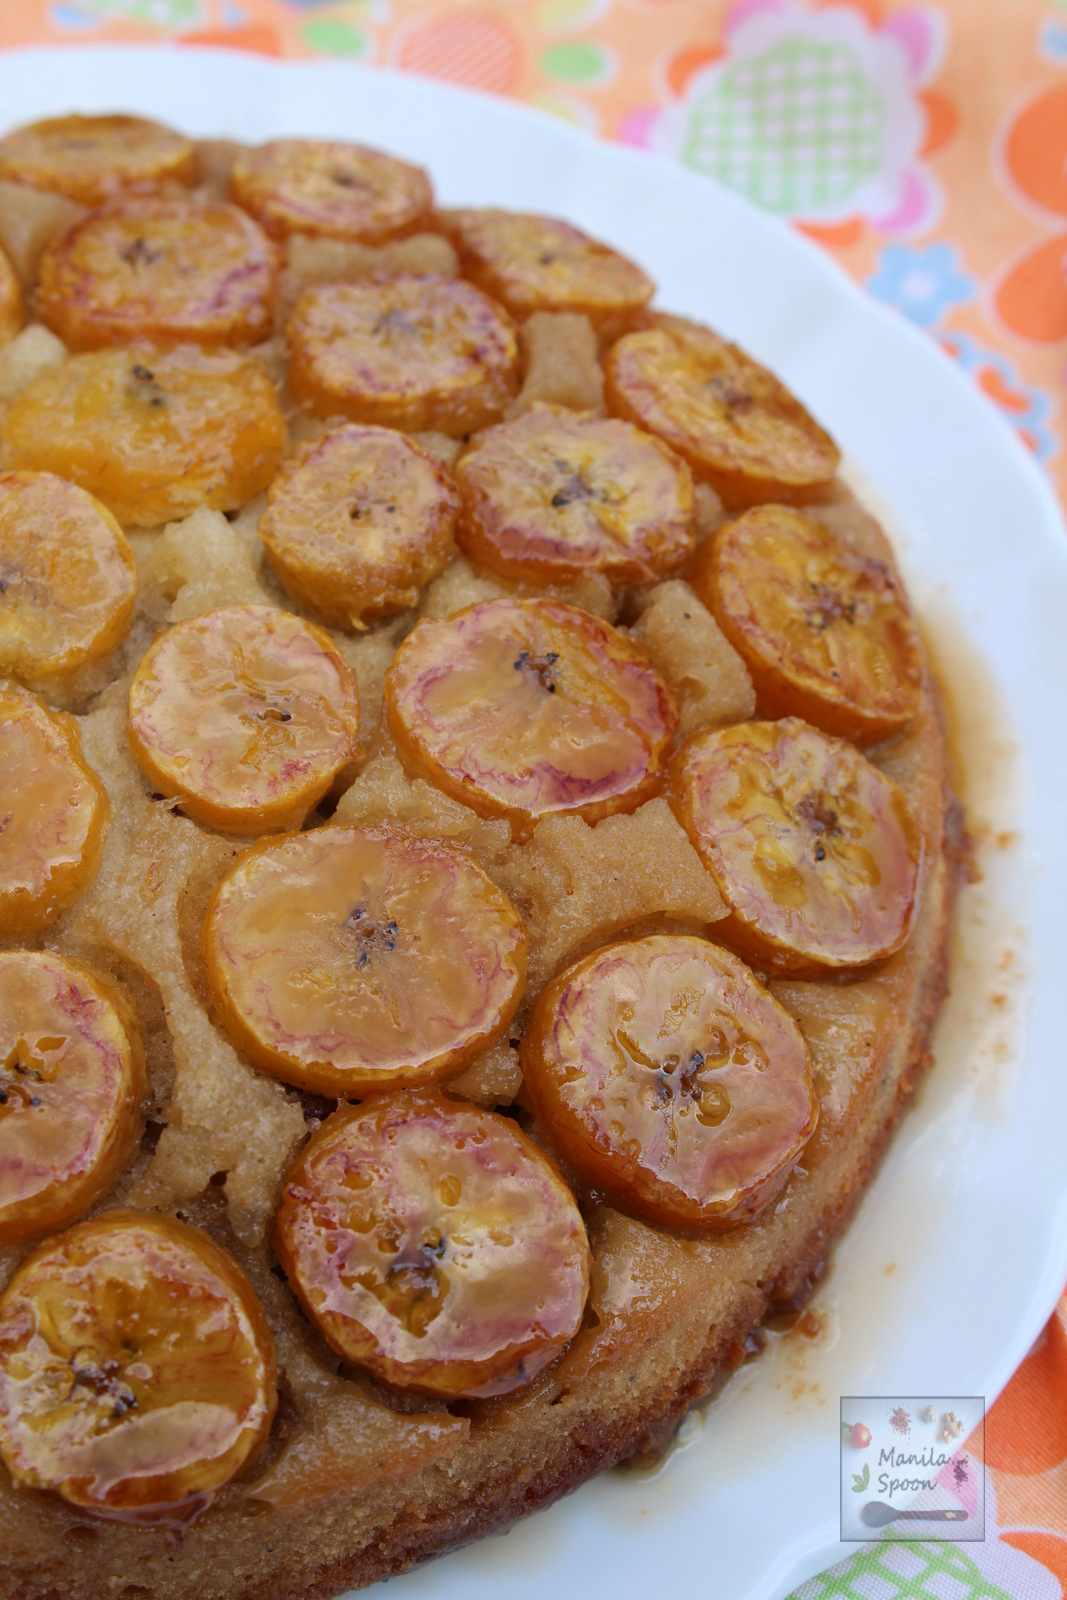 Use sweet ripe bananas or plantains to make this light, super-moist and delicious upside down cake!